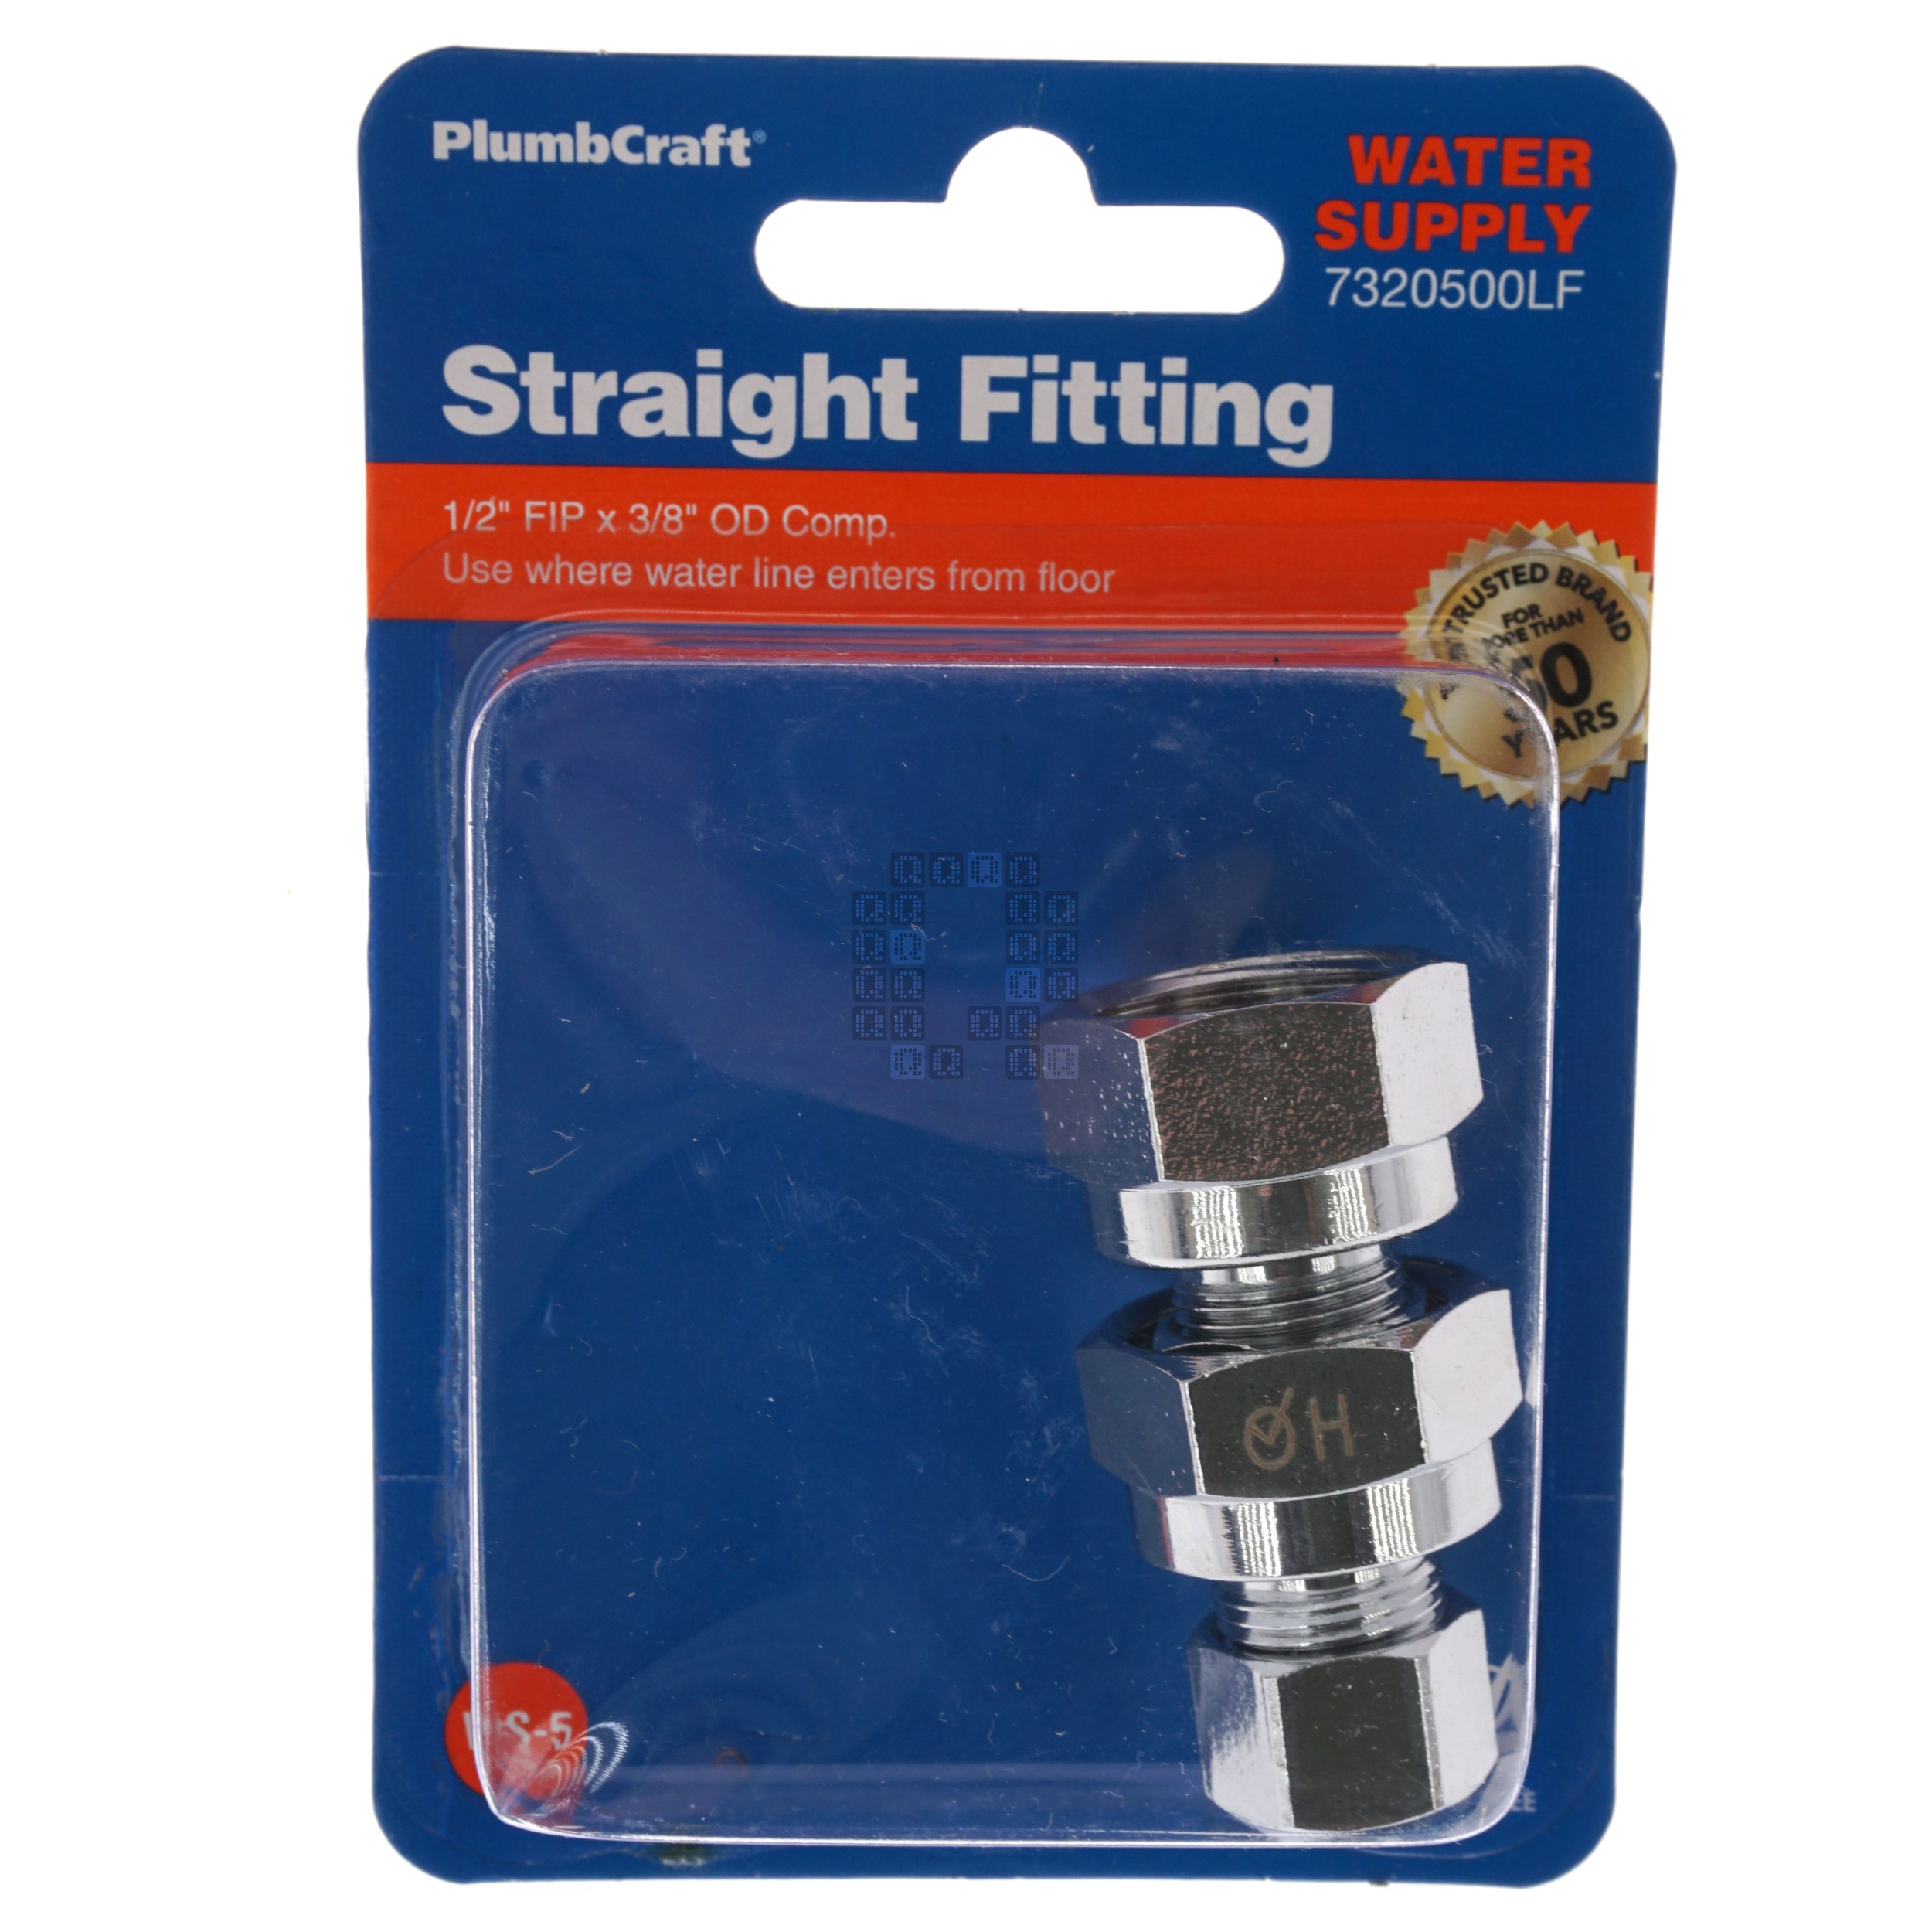 PlumbCraft 7320500LF 1/2" FIP x 3/8" OD Compression Water Supply Straight Fitting, Chrome Plated